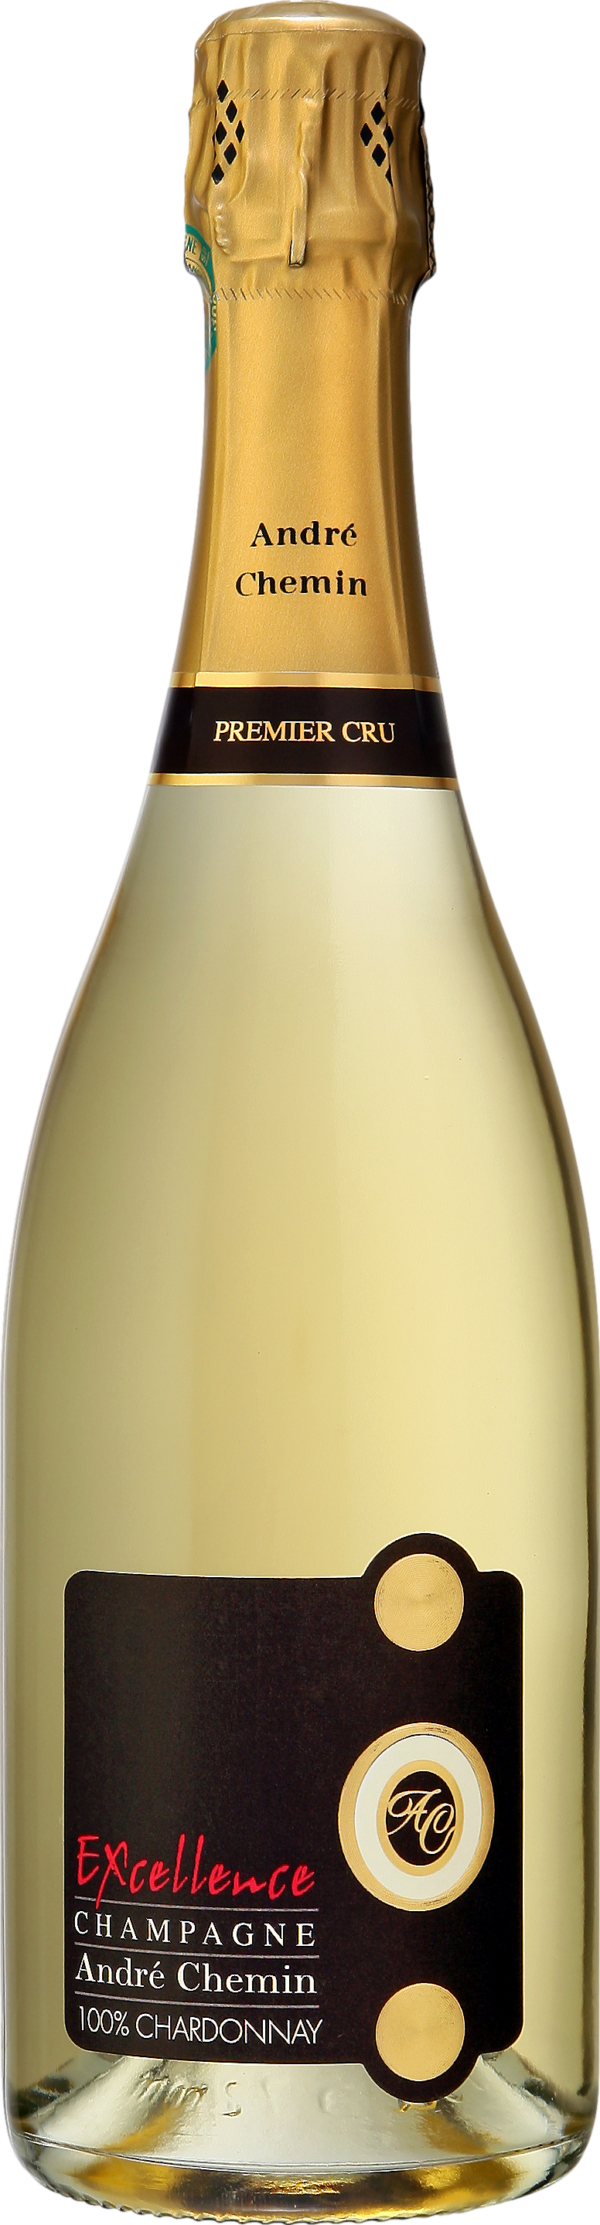 Product image of Champagne Andre Chemin Premier Cru Excellence Brut 2010 from 8wines